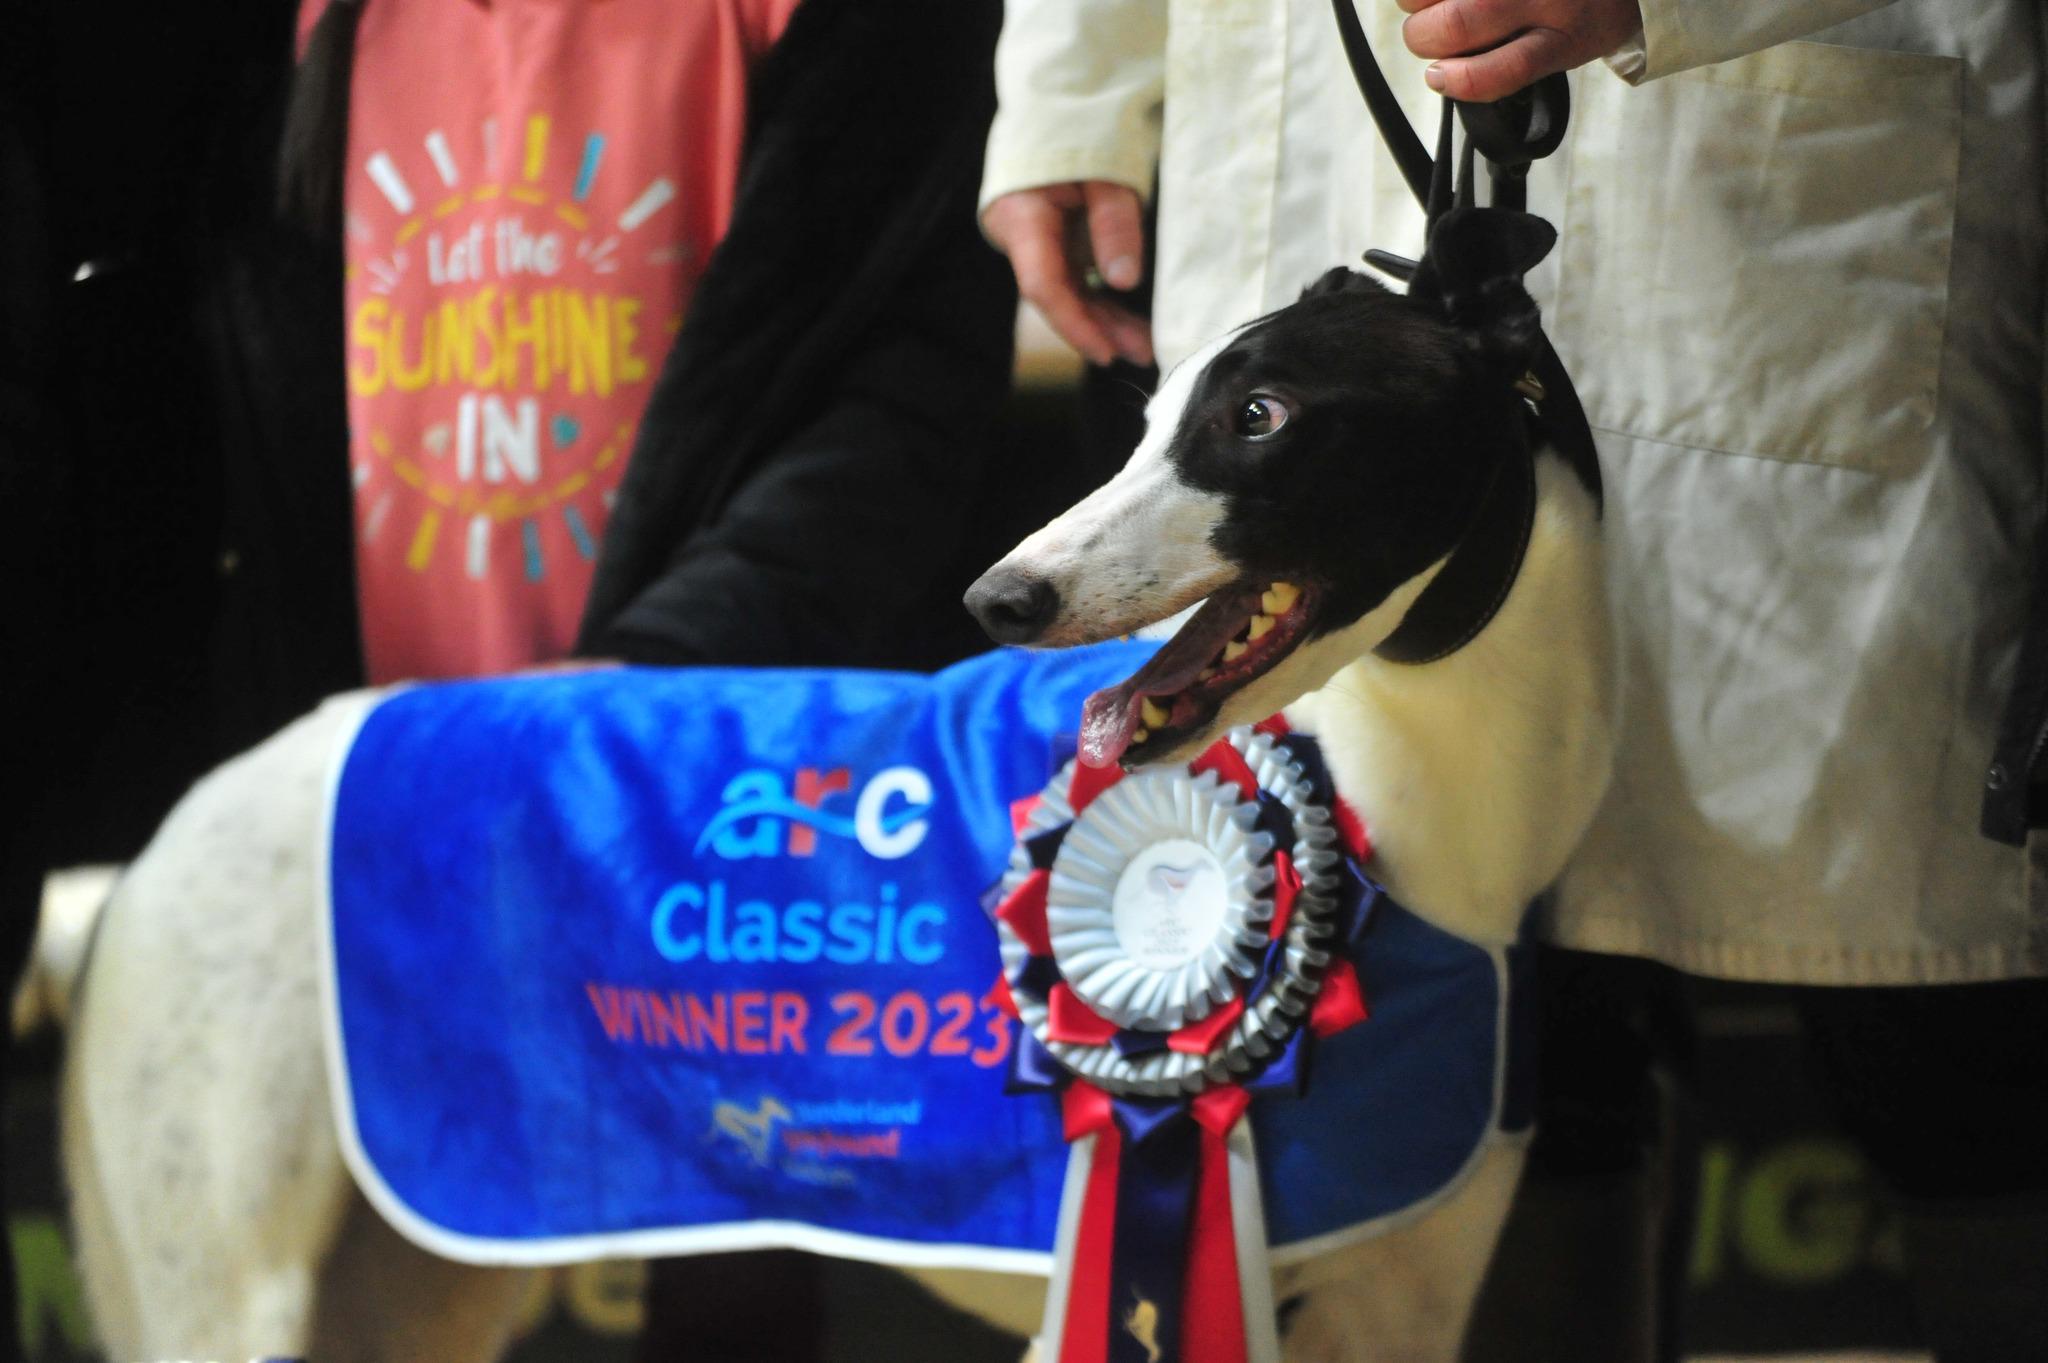 A greyhound racing champion aims to win the final competition of the year